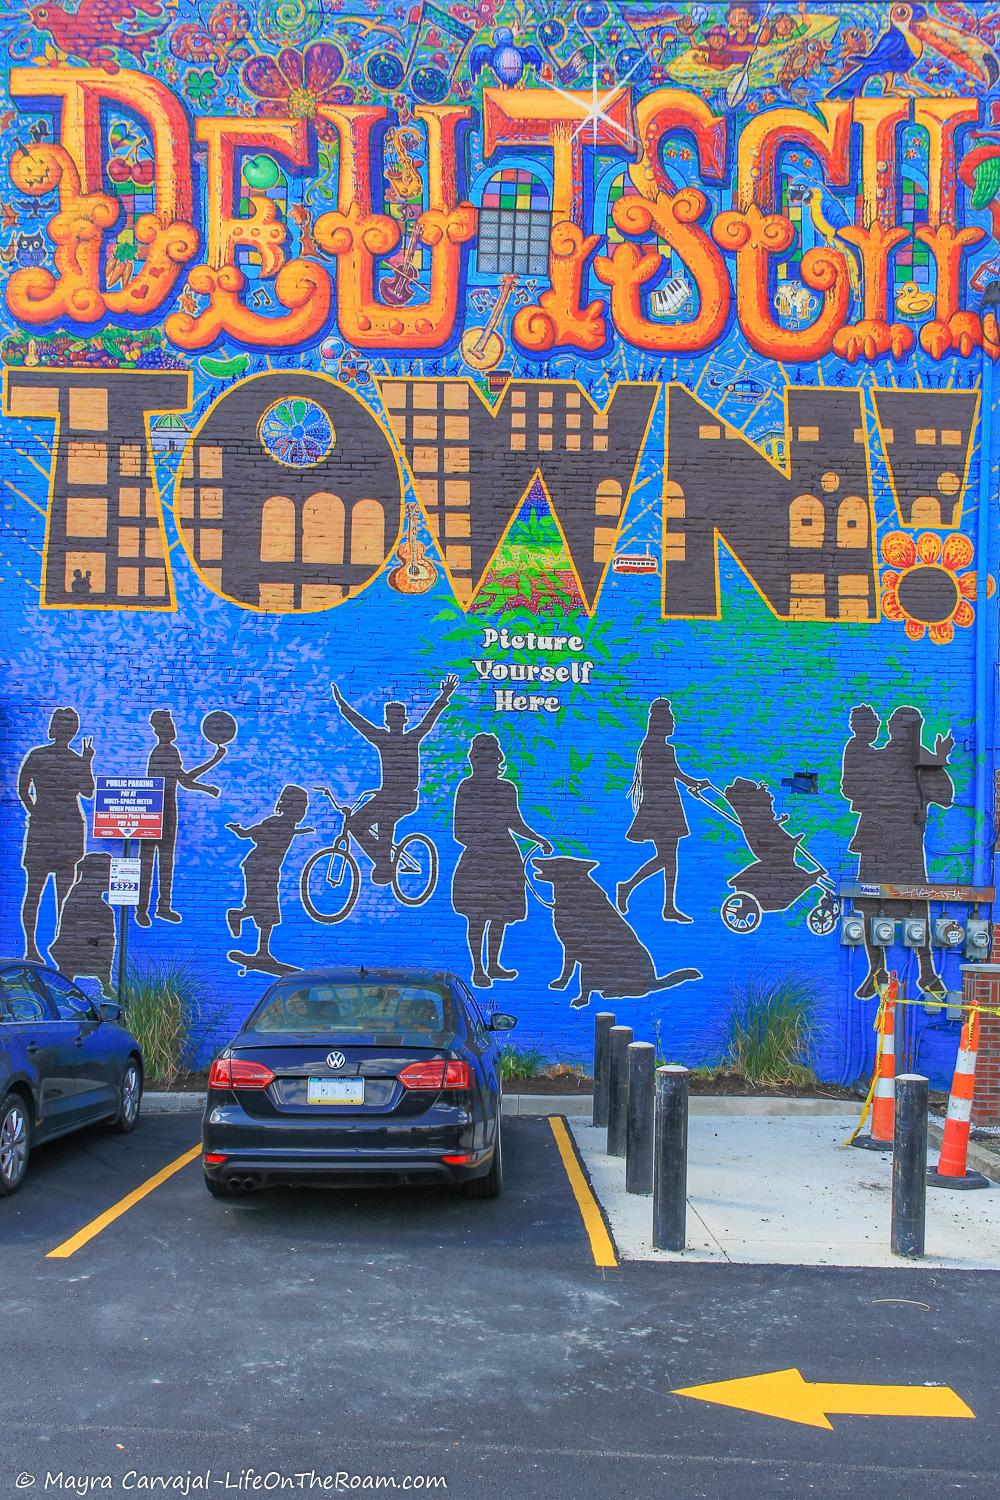 A colourful mural in the city featuring the lettering "Deutschtown"